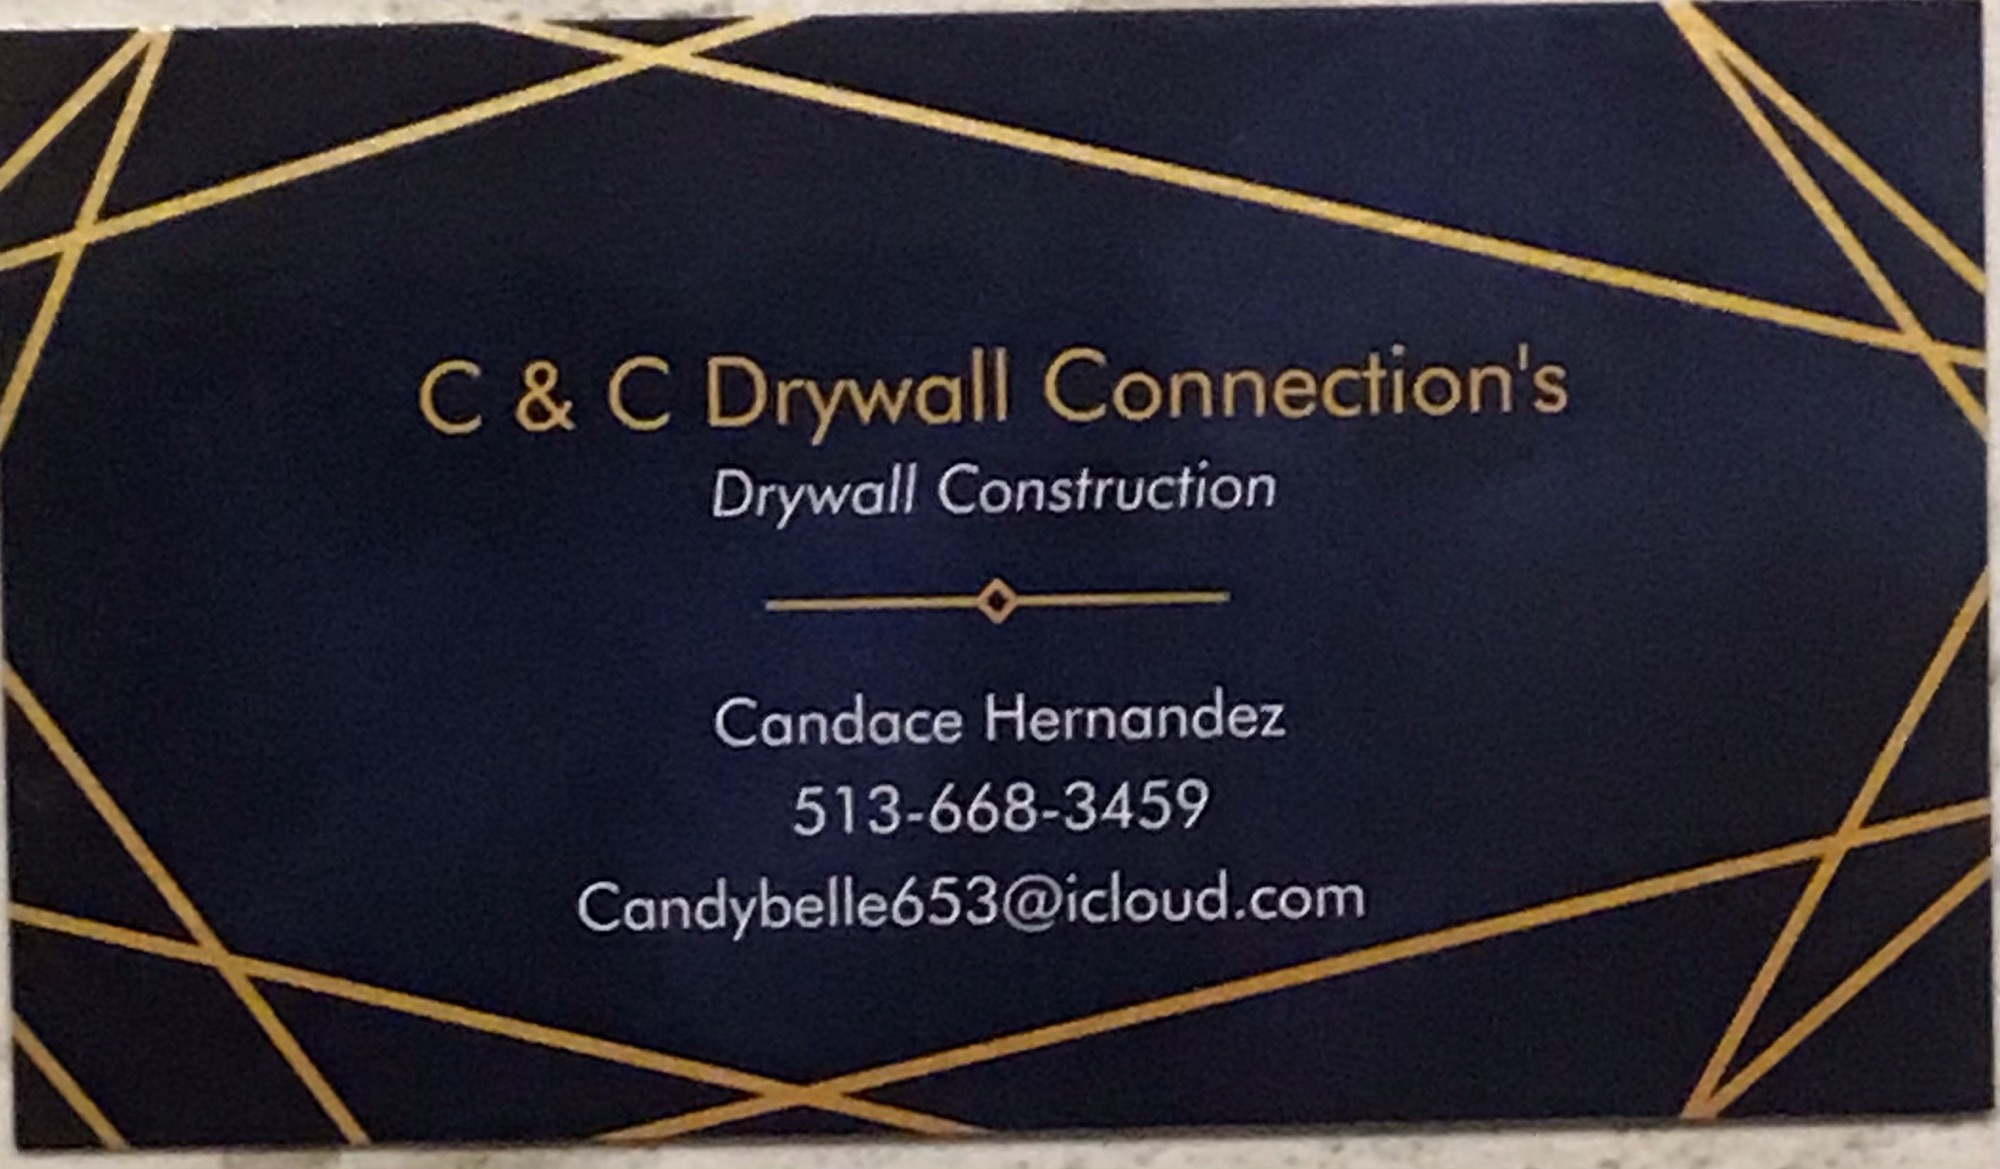 C & C Drywall Connection's Logo